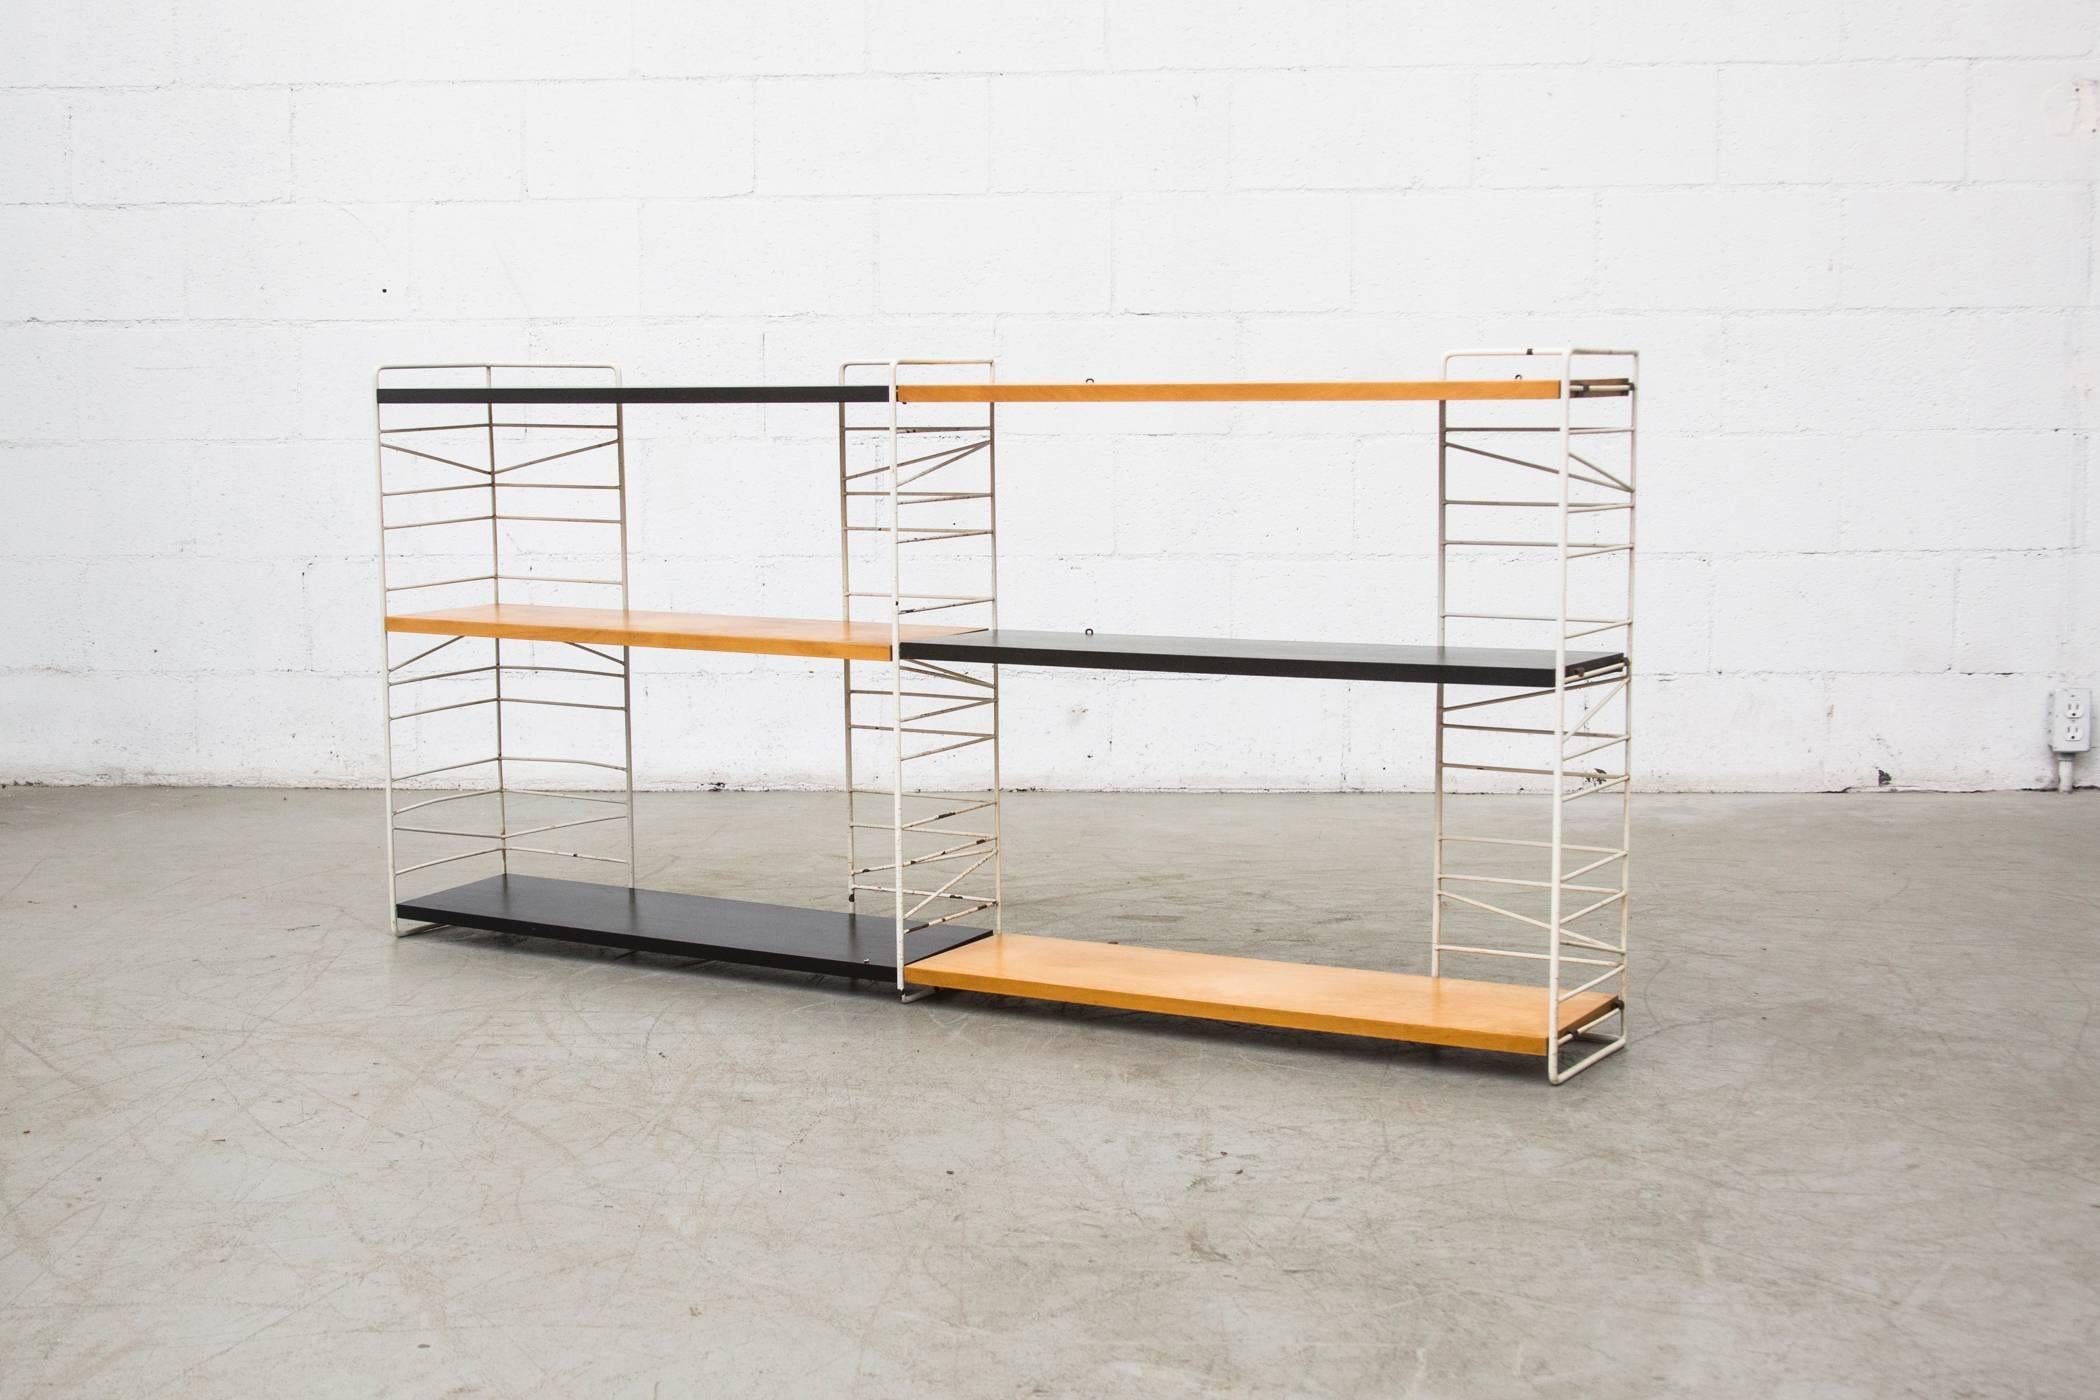 Very versatile birch and black shelving unit with original white coated wire frame. Shelves are in good order, lightly refinished, while the frame is extremely original and visibly worn and peeling.